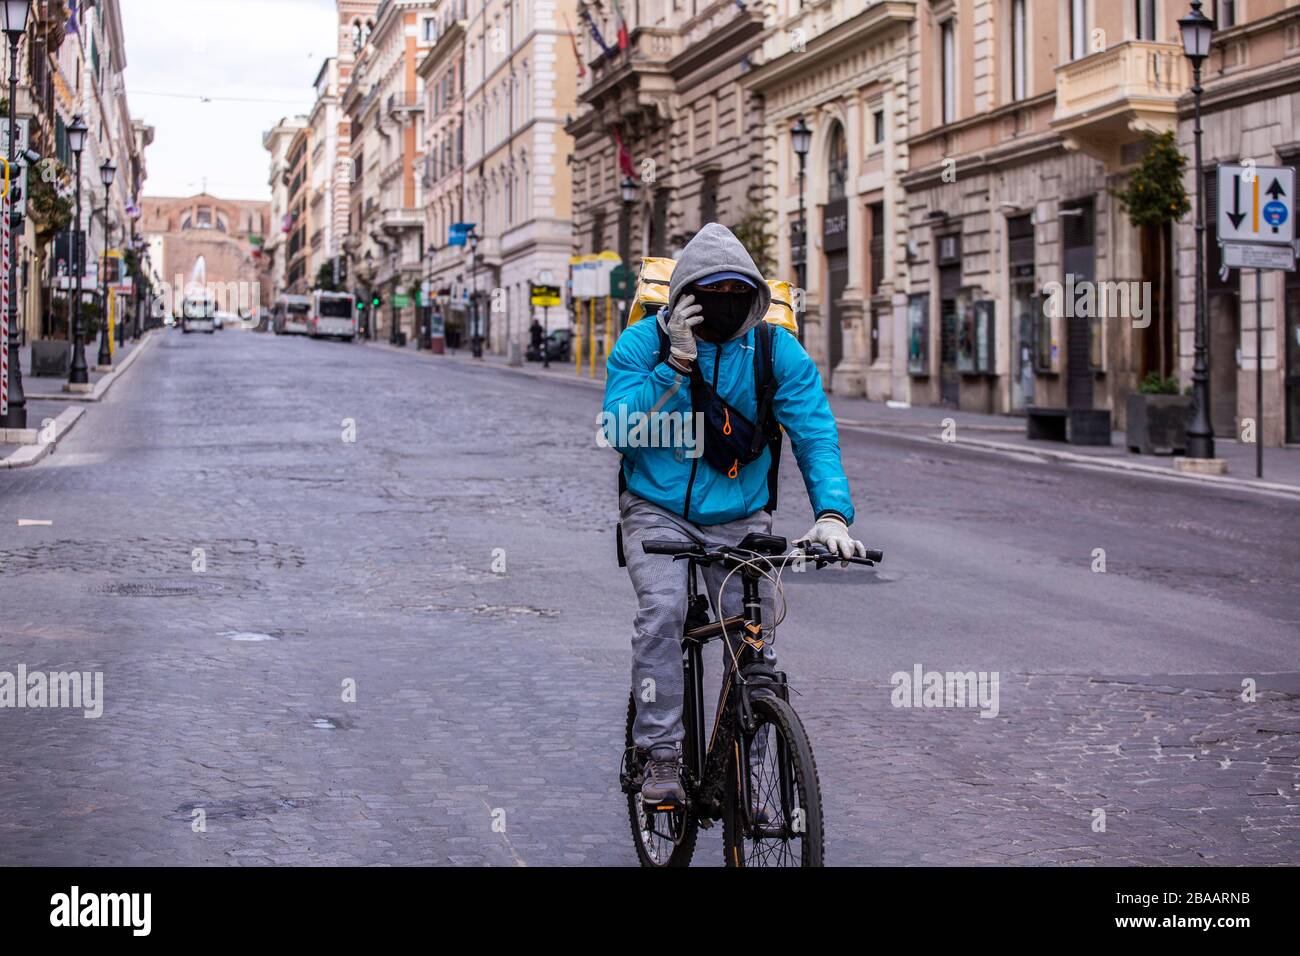 Rome March 25th 2020 Rome during the Coronavirus pandemic. worker in Via Nazionale Photo by Elio Castoria Stock Photo